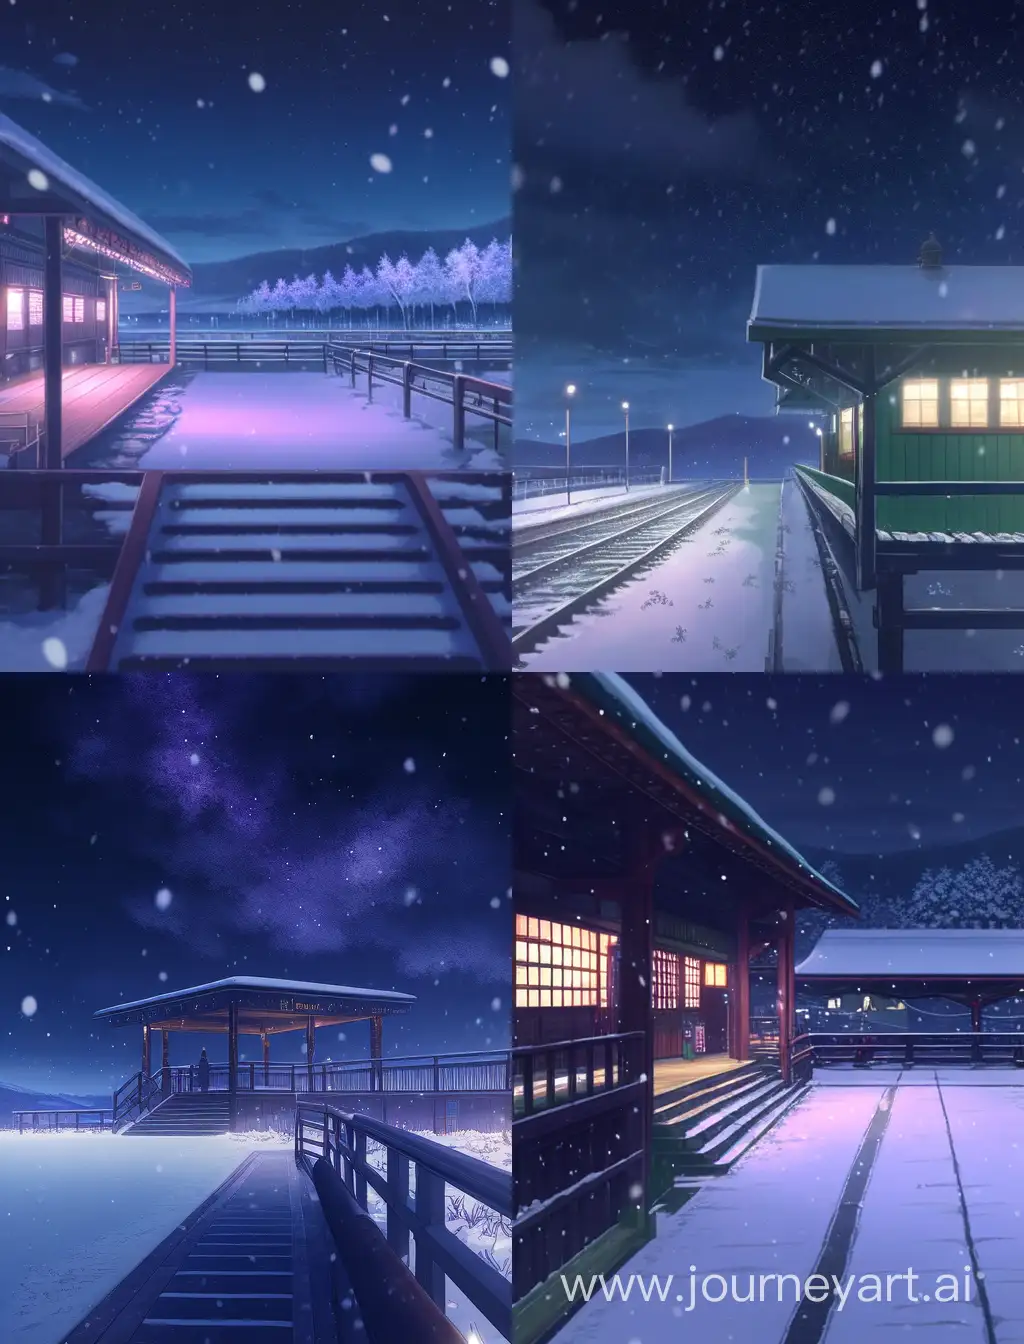 Lonely-Platform-in-Snowy-Moonlight-Serene-Orchid-Beauty-in-Anime-Style